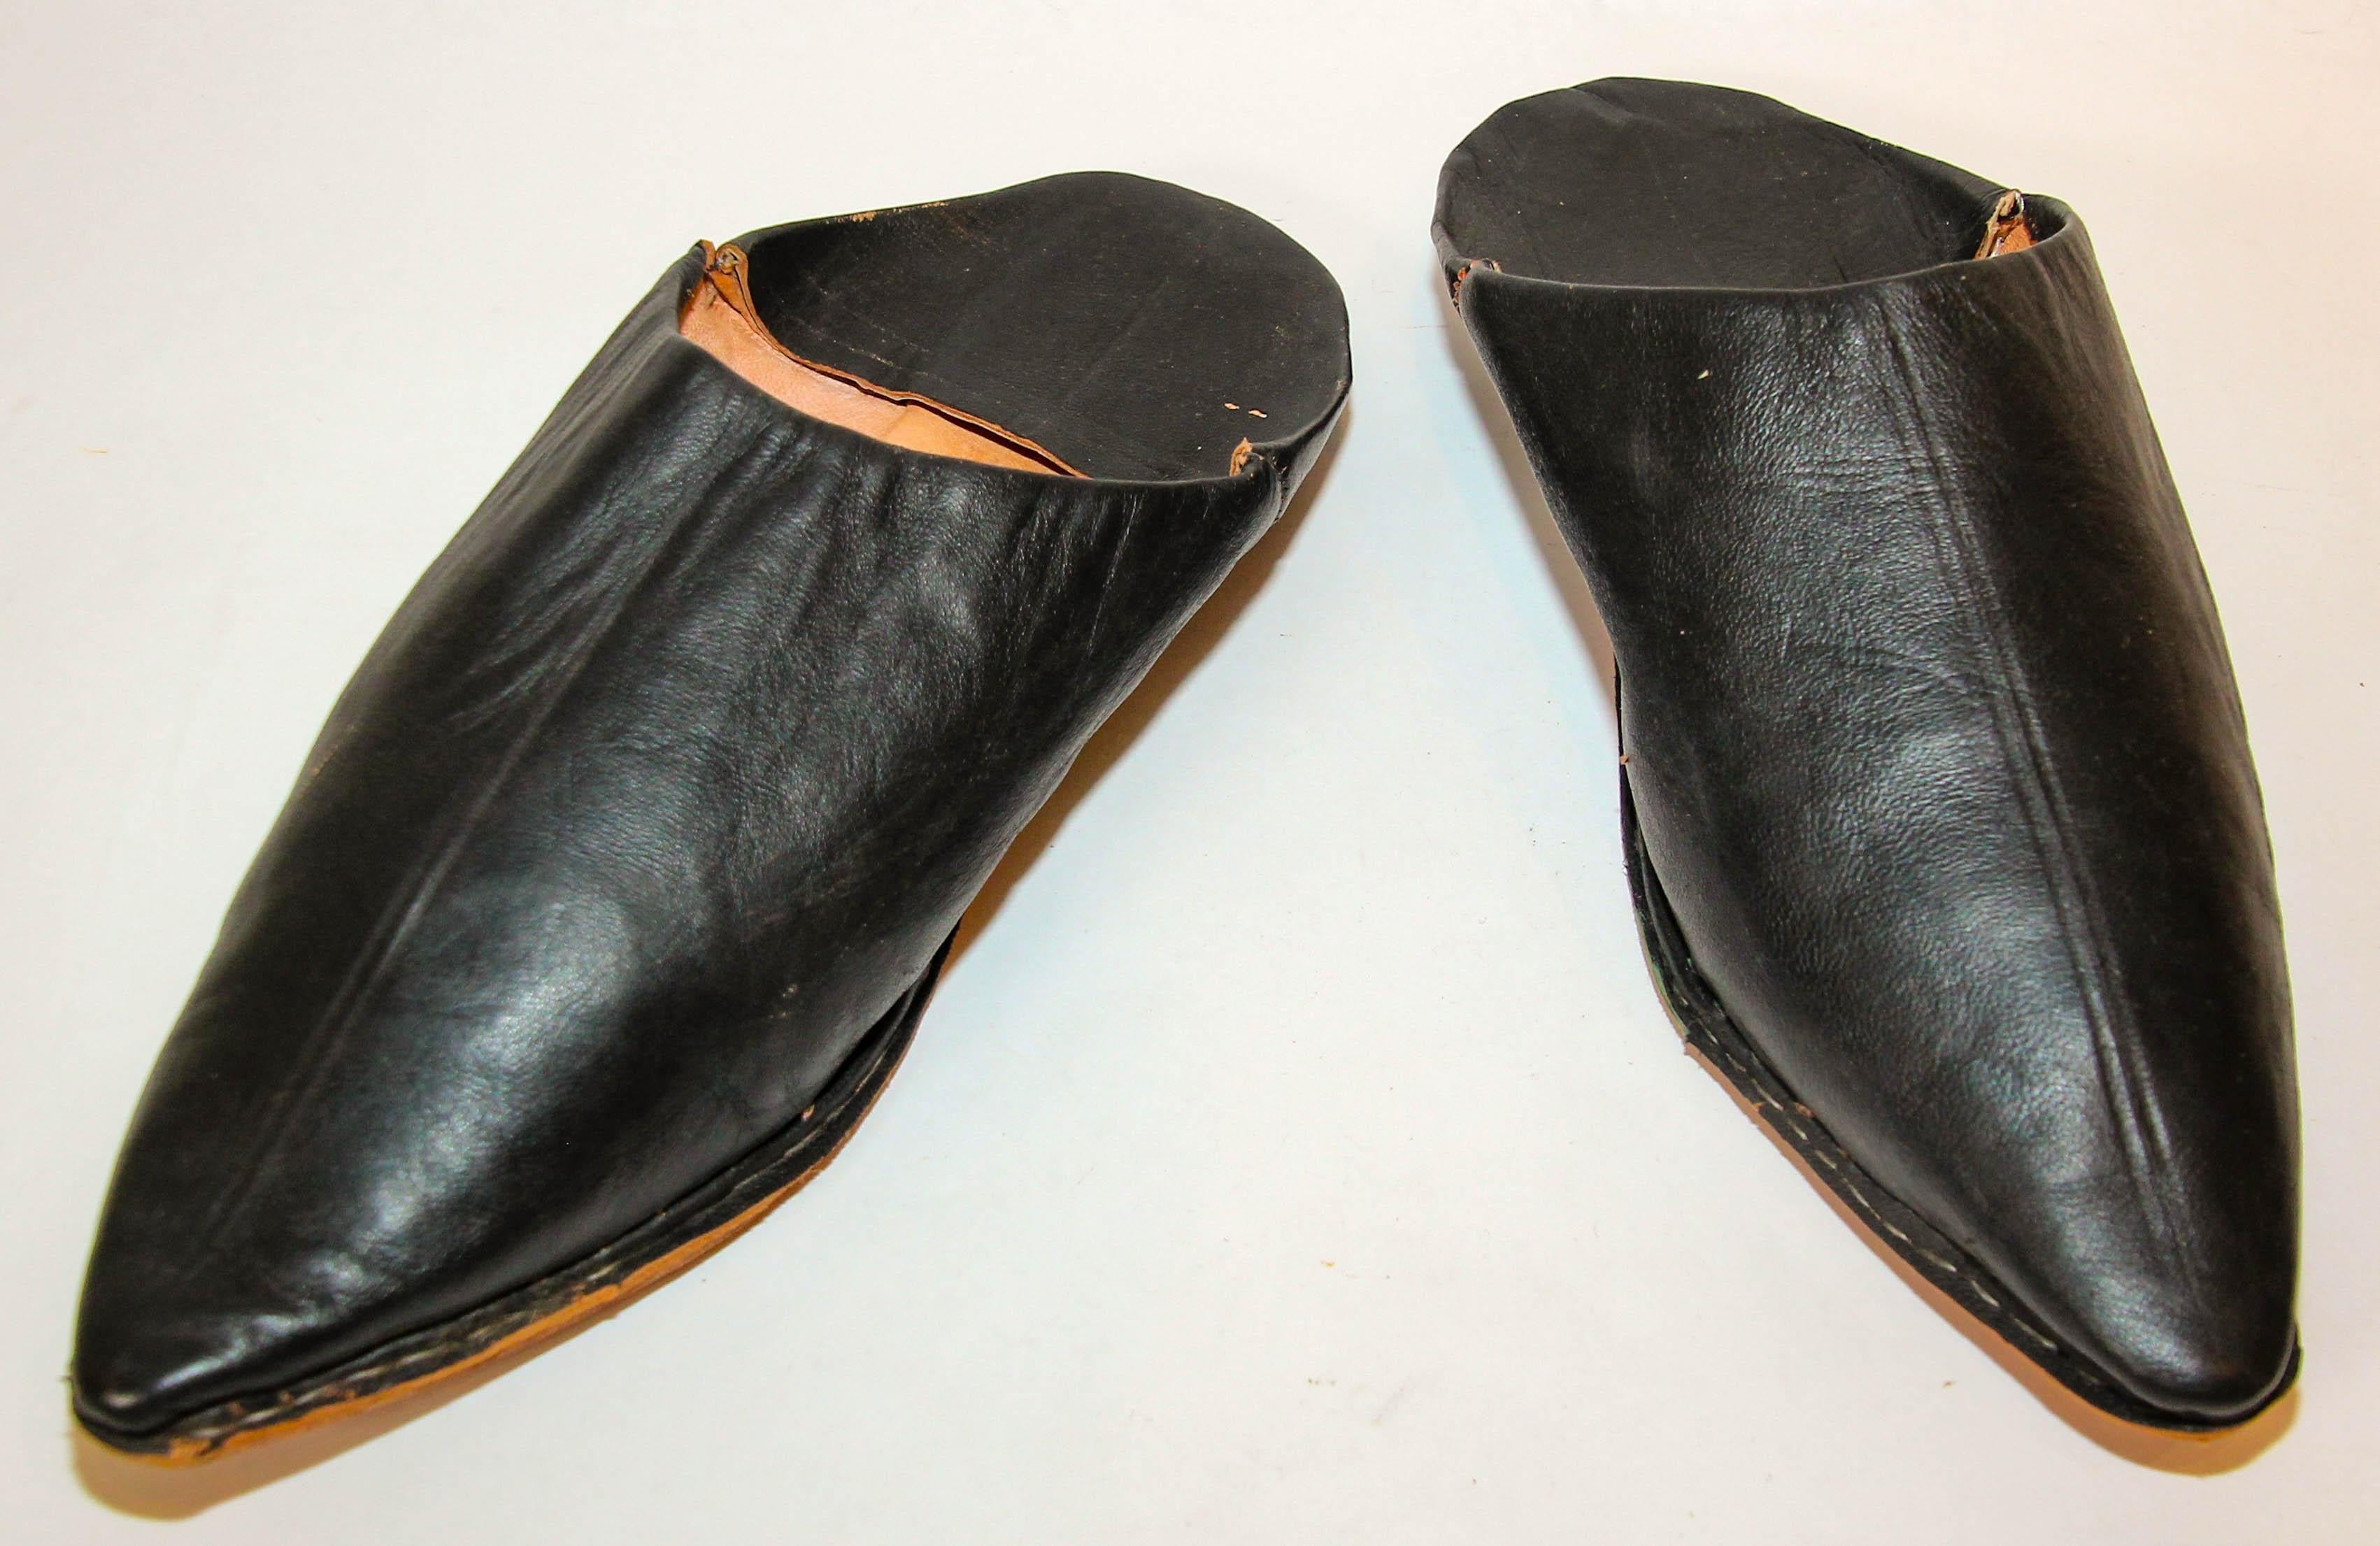 Moroccan Pointed Babouche Black Leather Slippers are the traditional North African shoes babouche slip-on.
The Moroccan hand tooled babouche slippers are handmade using high quality leather.
These traditional Moroccan leather shoes with leather sole